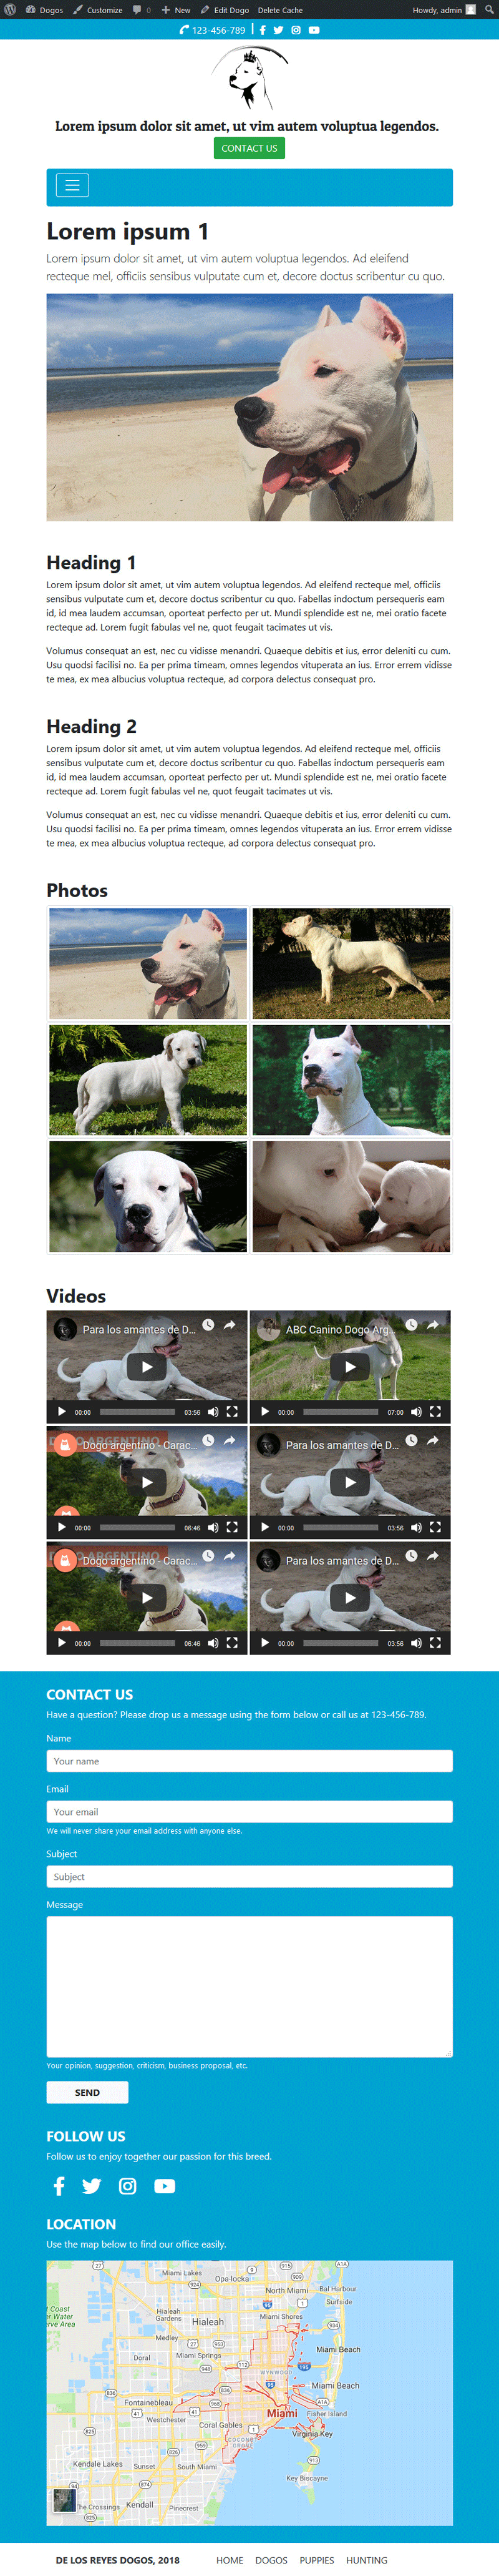 Website "De Los Reyes Dogos": A single page viewed on small-screen devices.